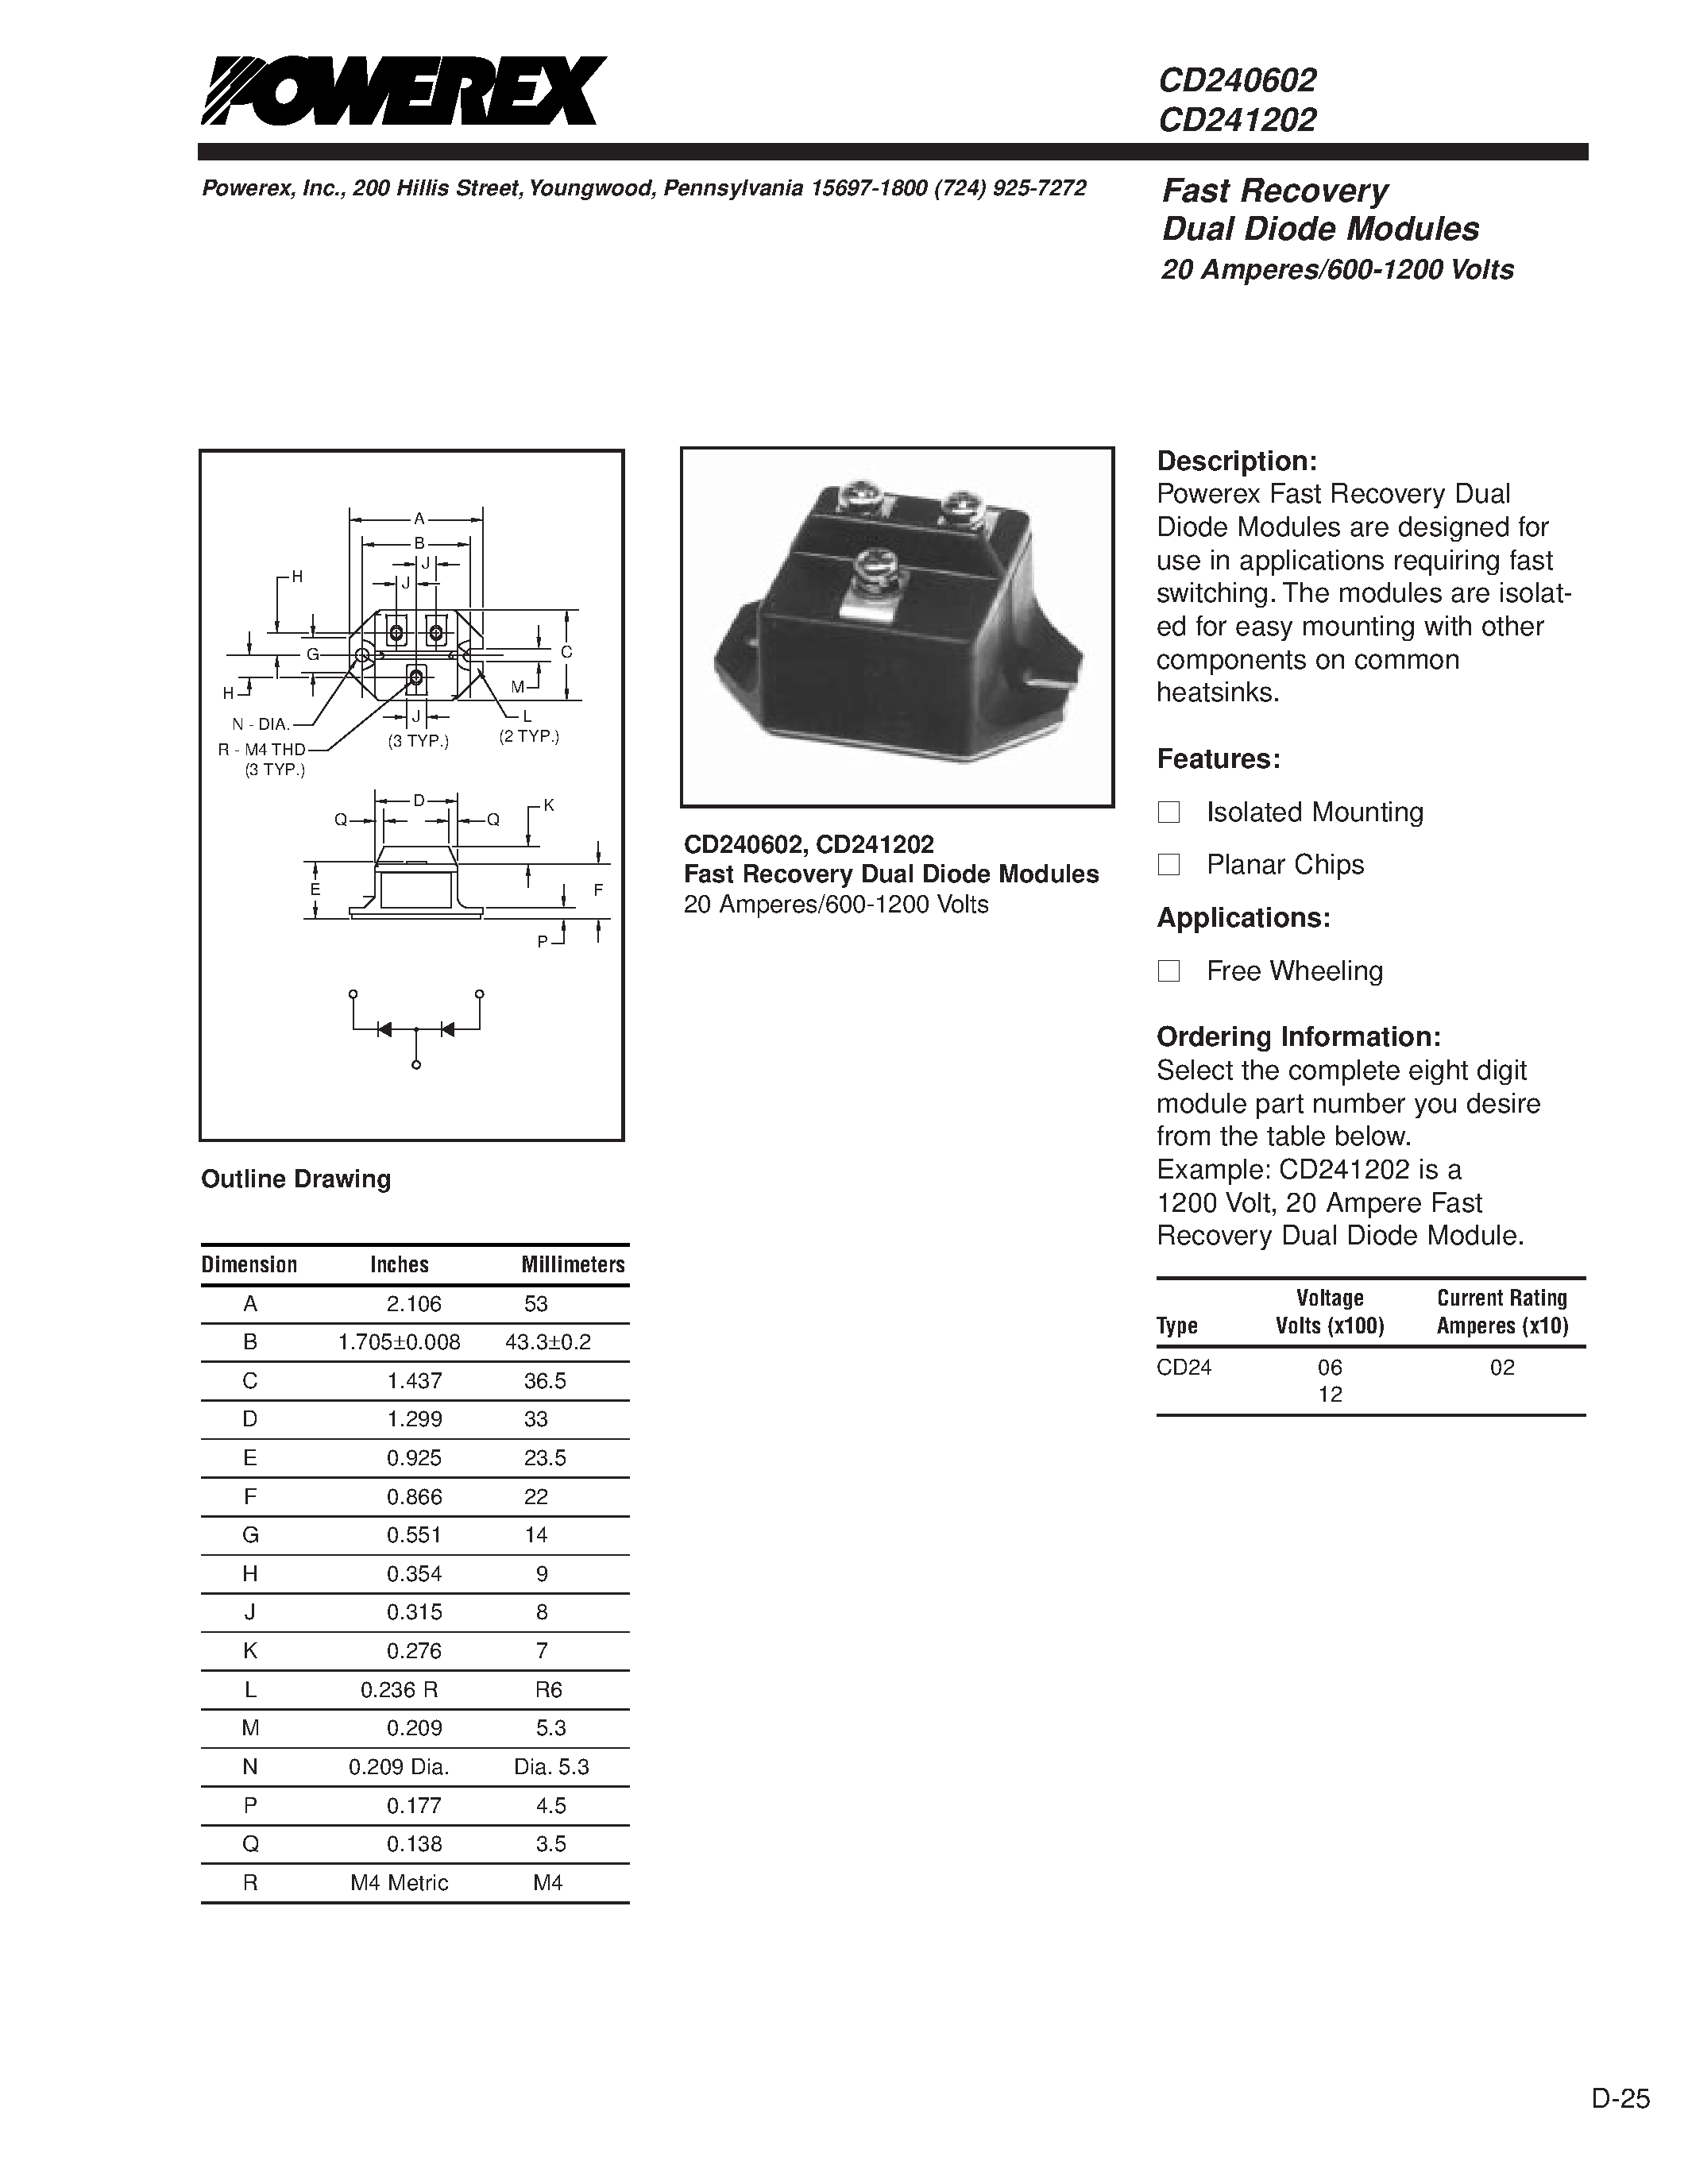 Datasheet CD240602 - Fast Recovery Dual Diode Modules 20 Amperes/600-1200 Volts page 1